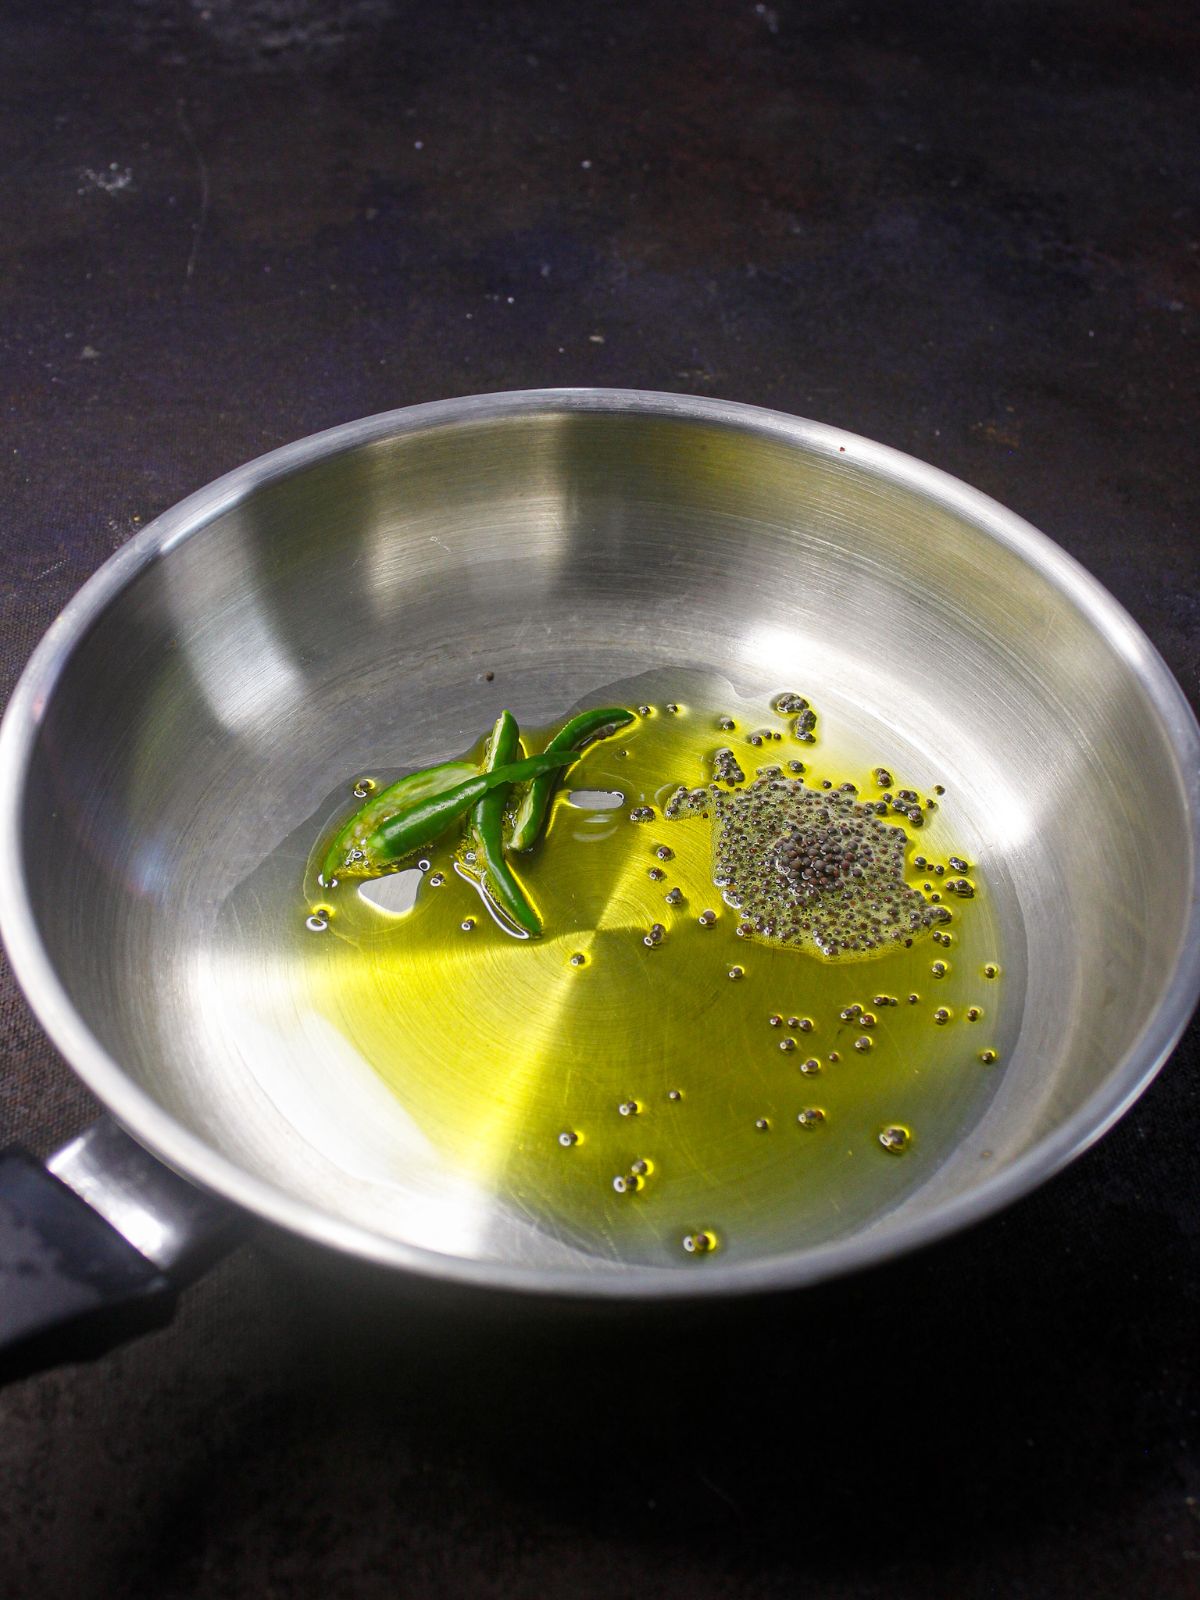 skillet with oil and herbs